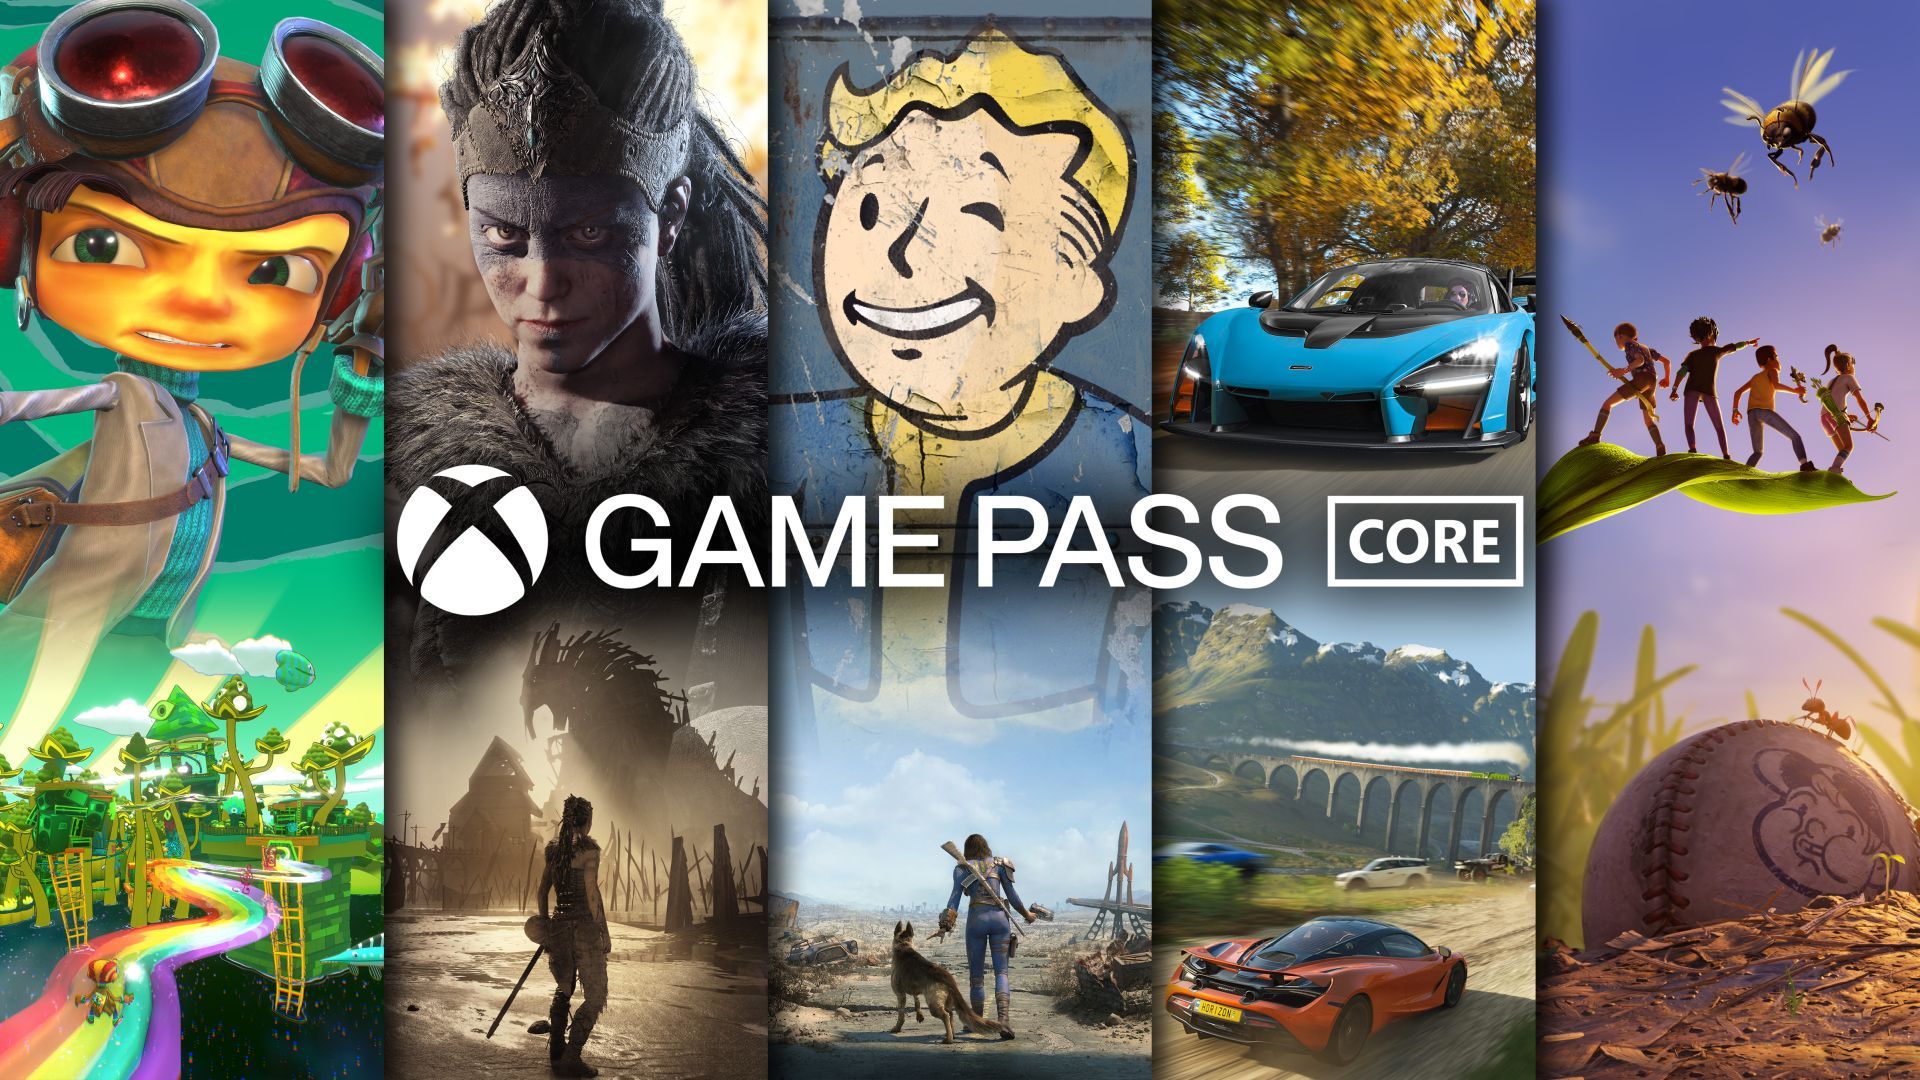 XBOX Game Pass Core 6 Months Subscription Card